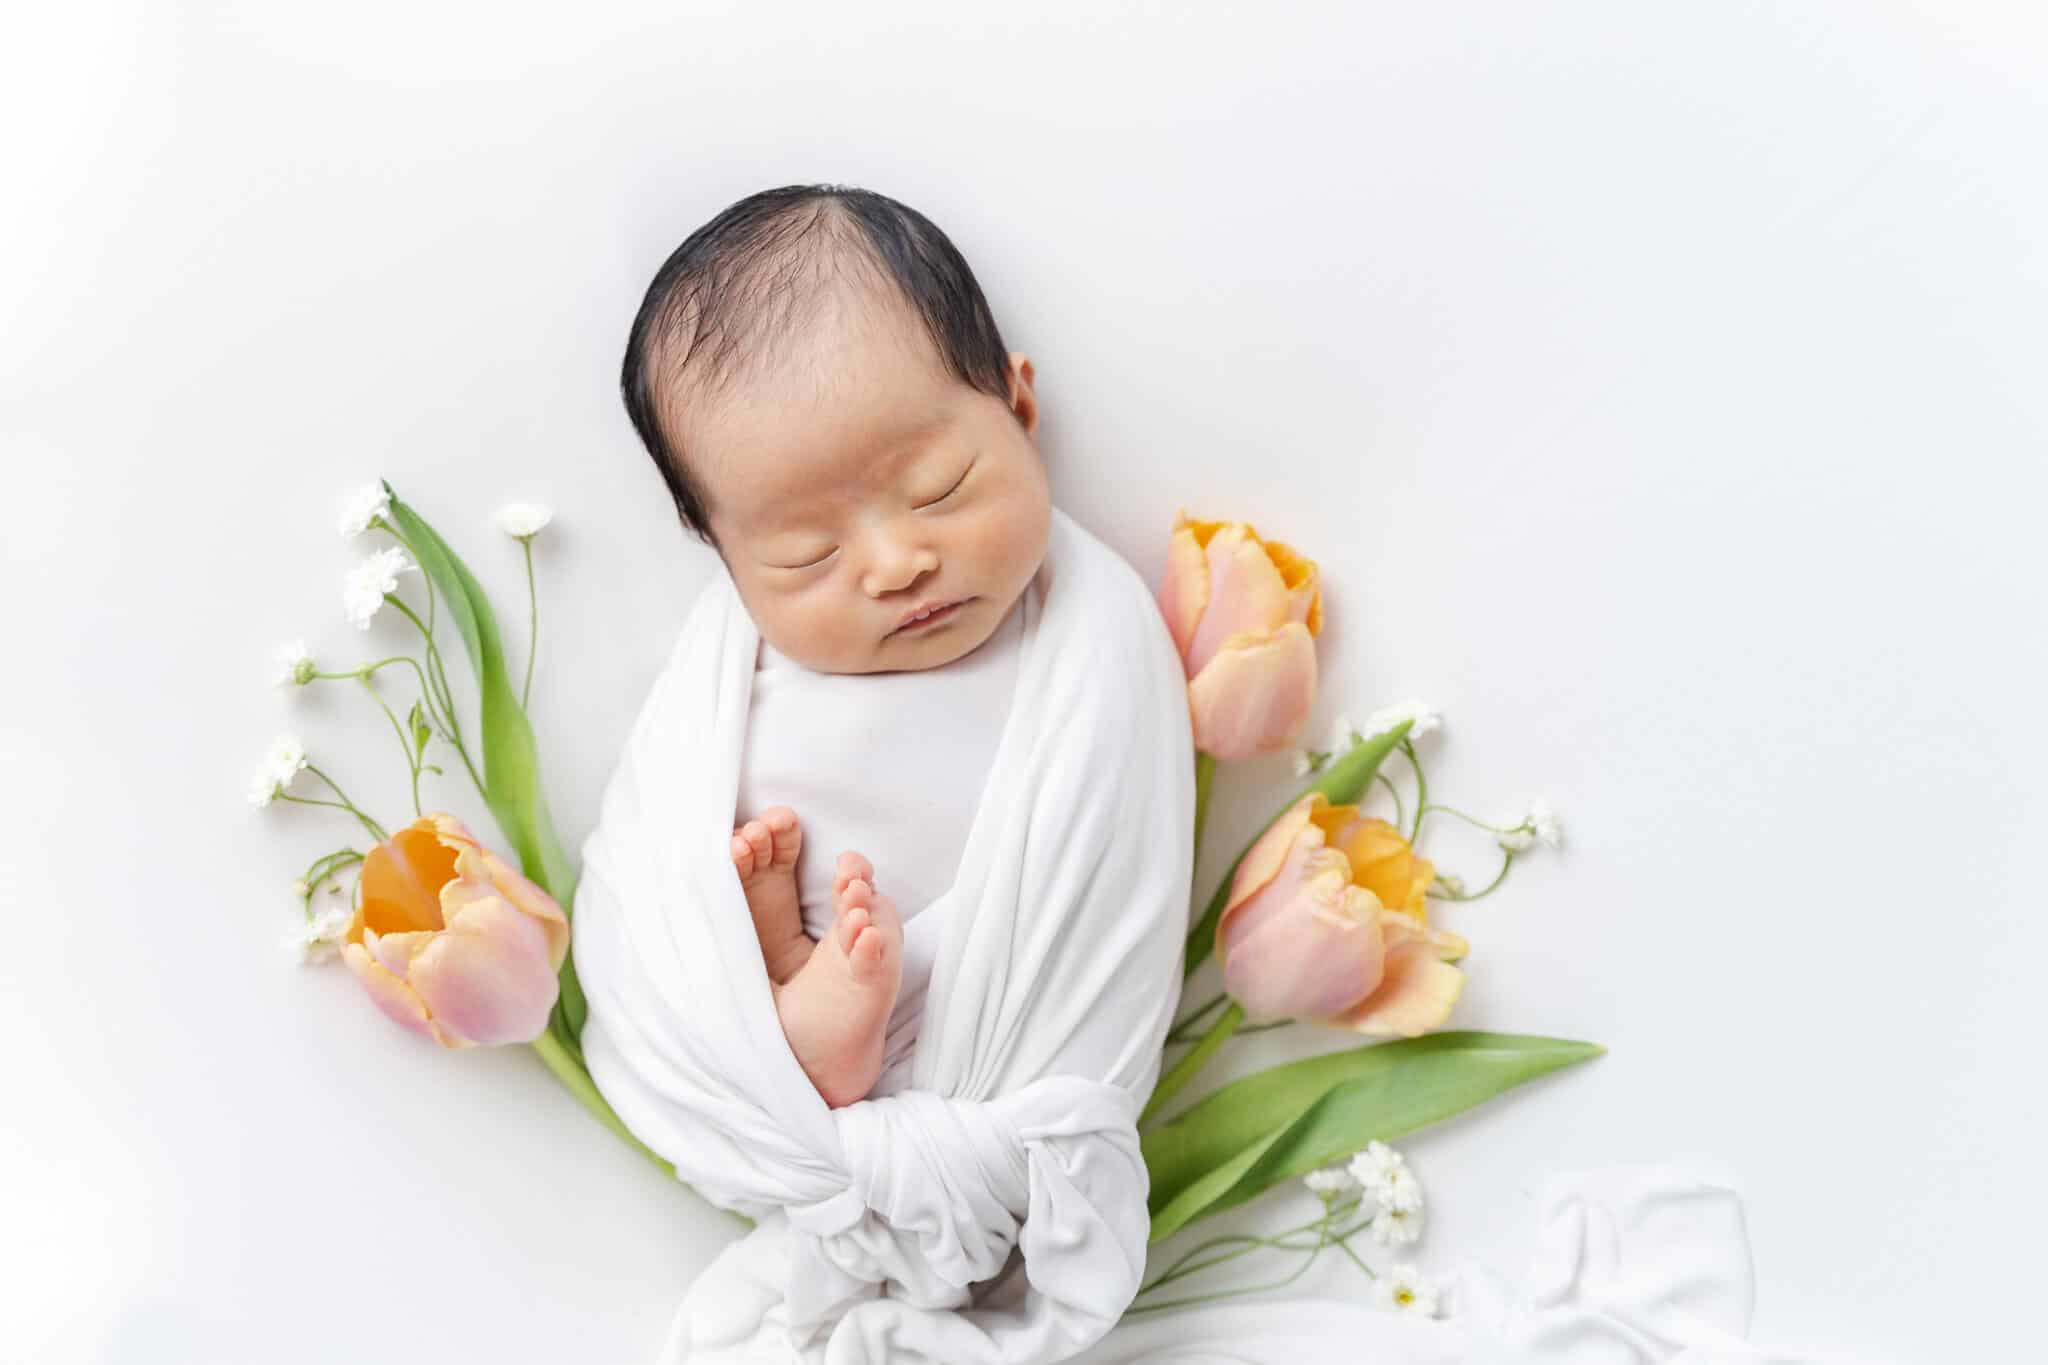 Sleeping newborn baby in white swaddle wrap surrounded by orange pink tulips and white daisies- Irvine Pediatricians